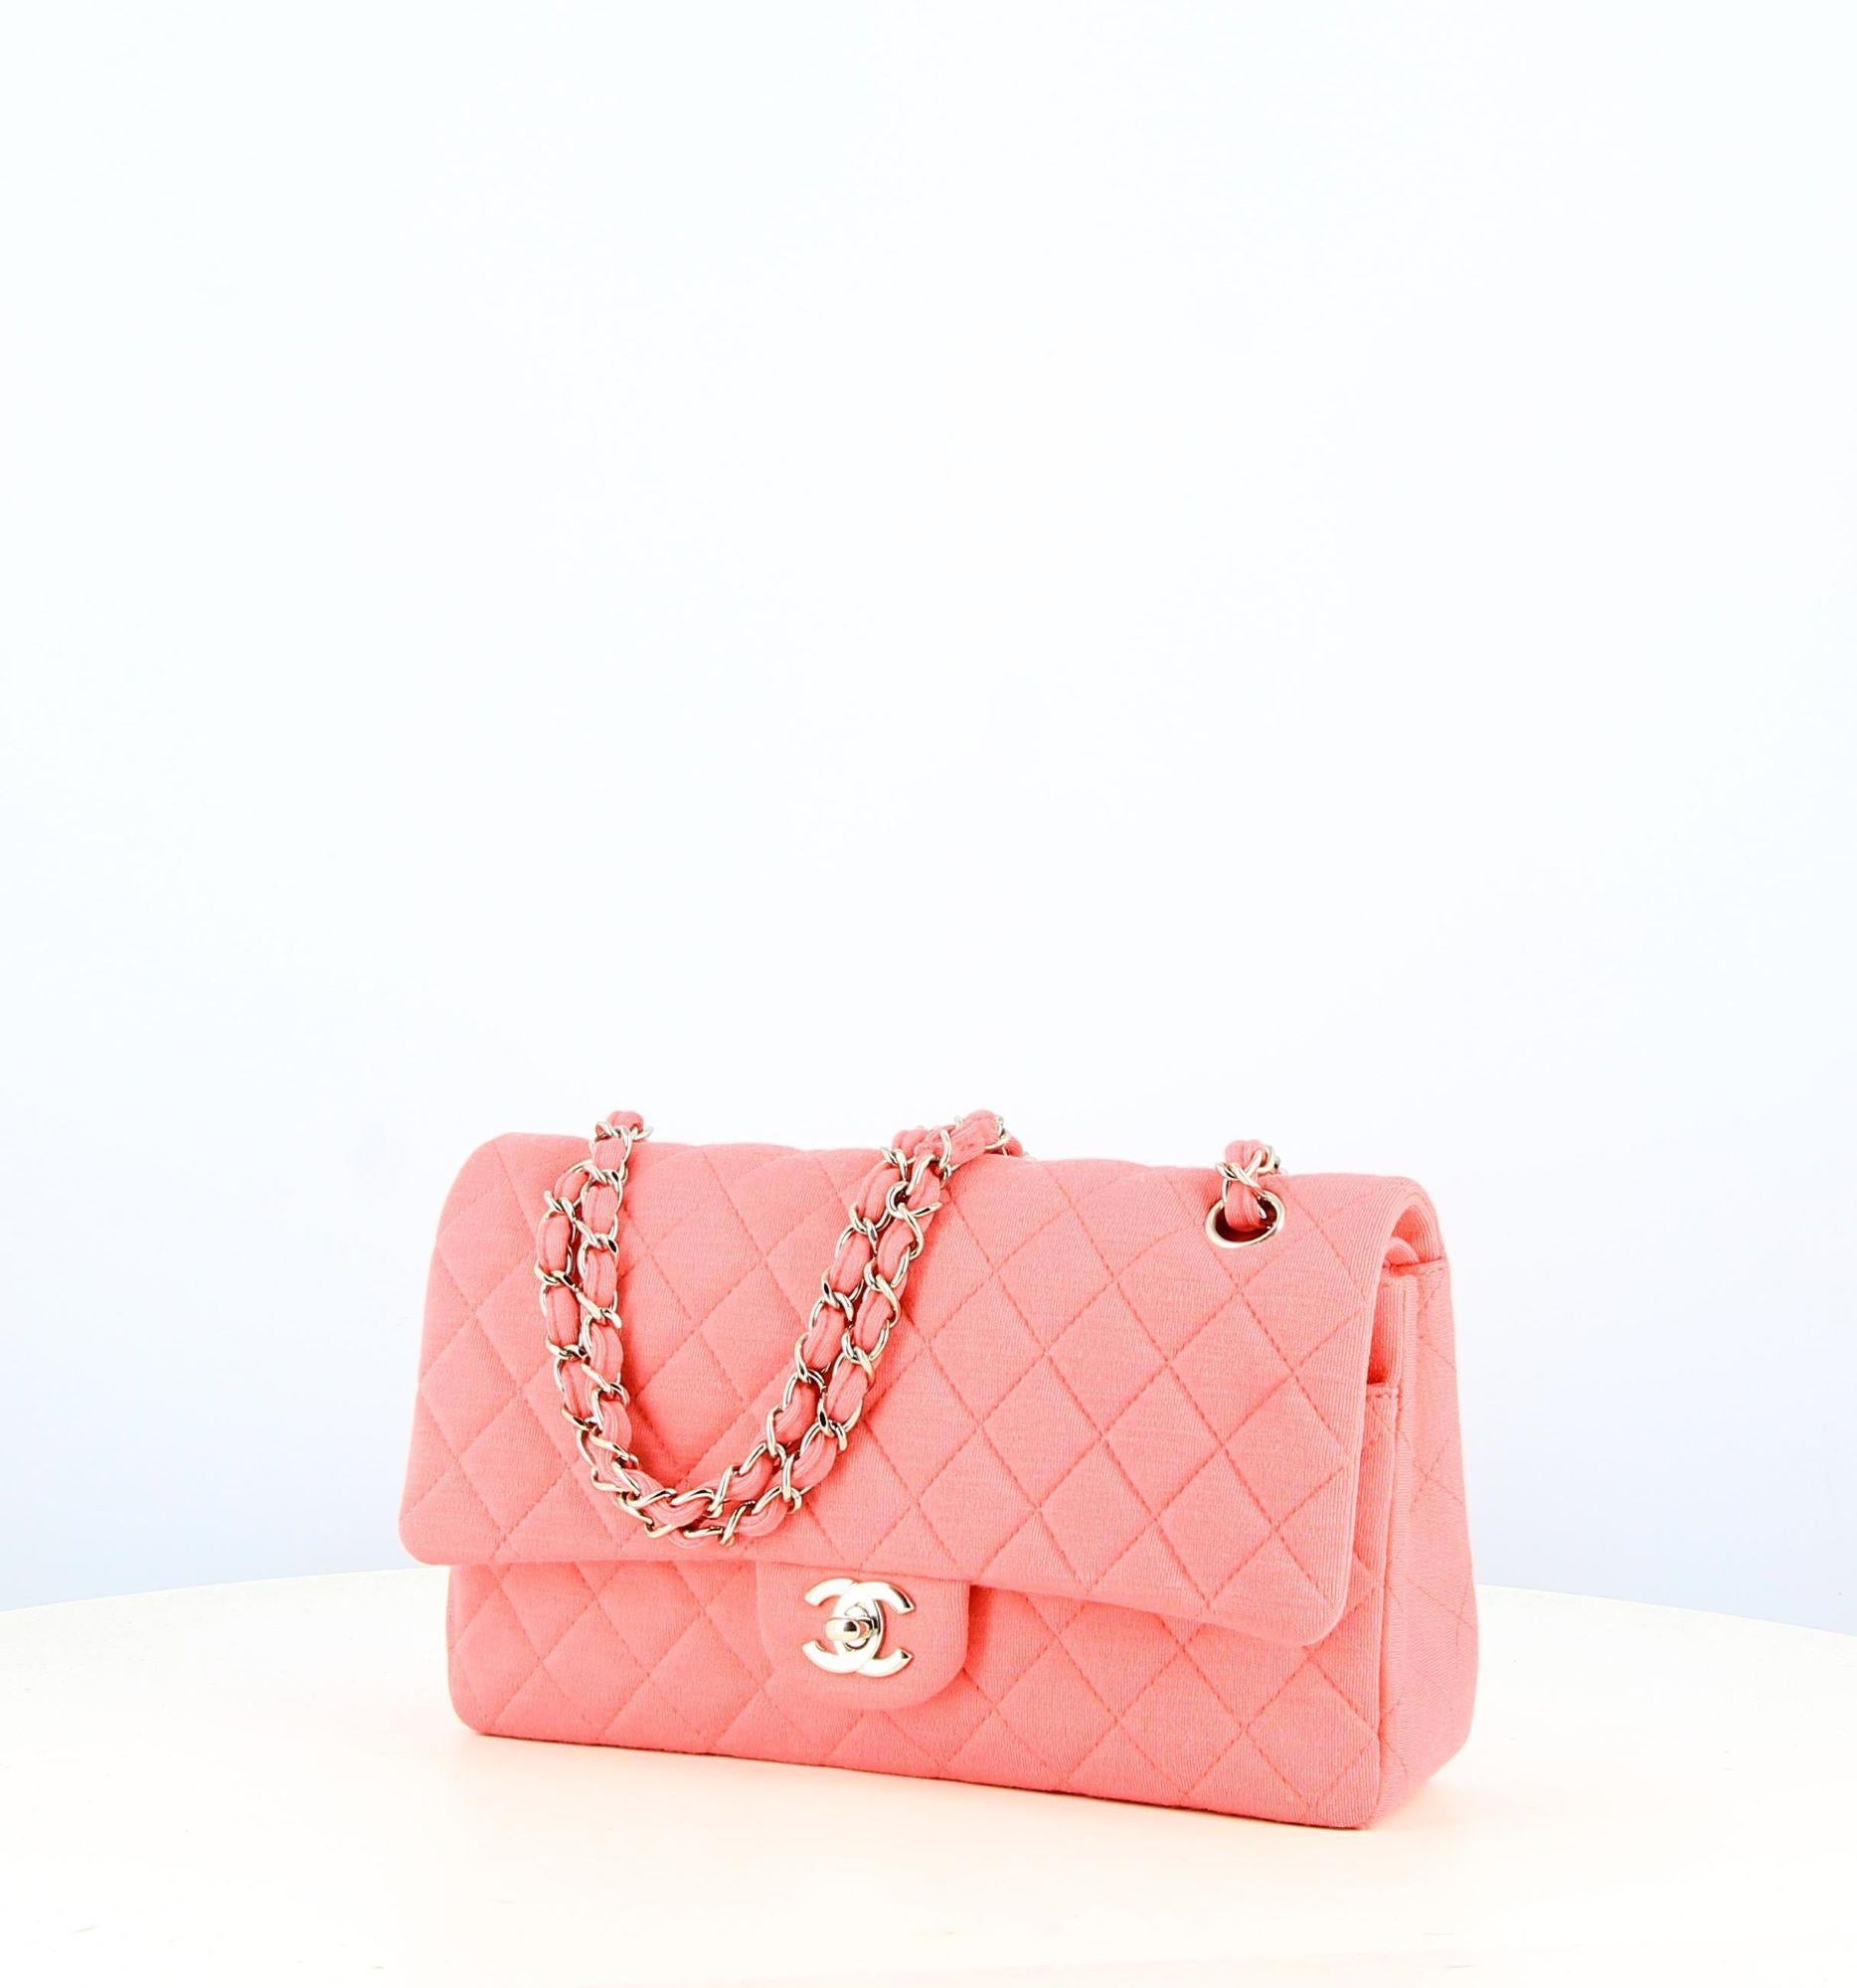 2014 Chanel Pink Quilted Bag Timeless
- Good condition, has slight traces of wear and tear with time.
- Handbag in pink jersey, readjustable handle, small back pocket, silver clasp.
- The interior is in pink leather, big double C logo, two parts but